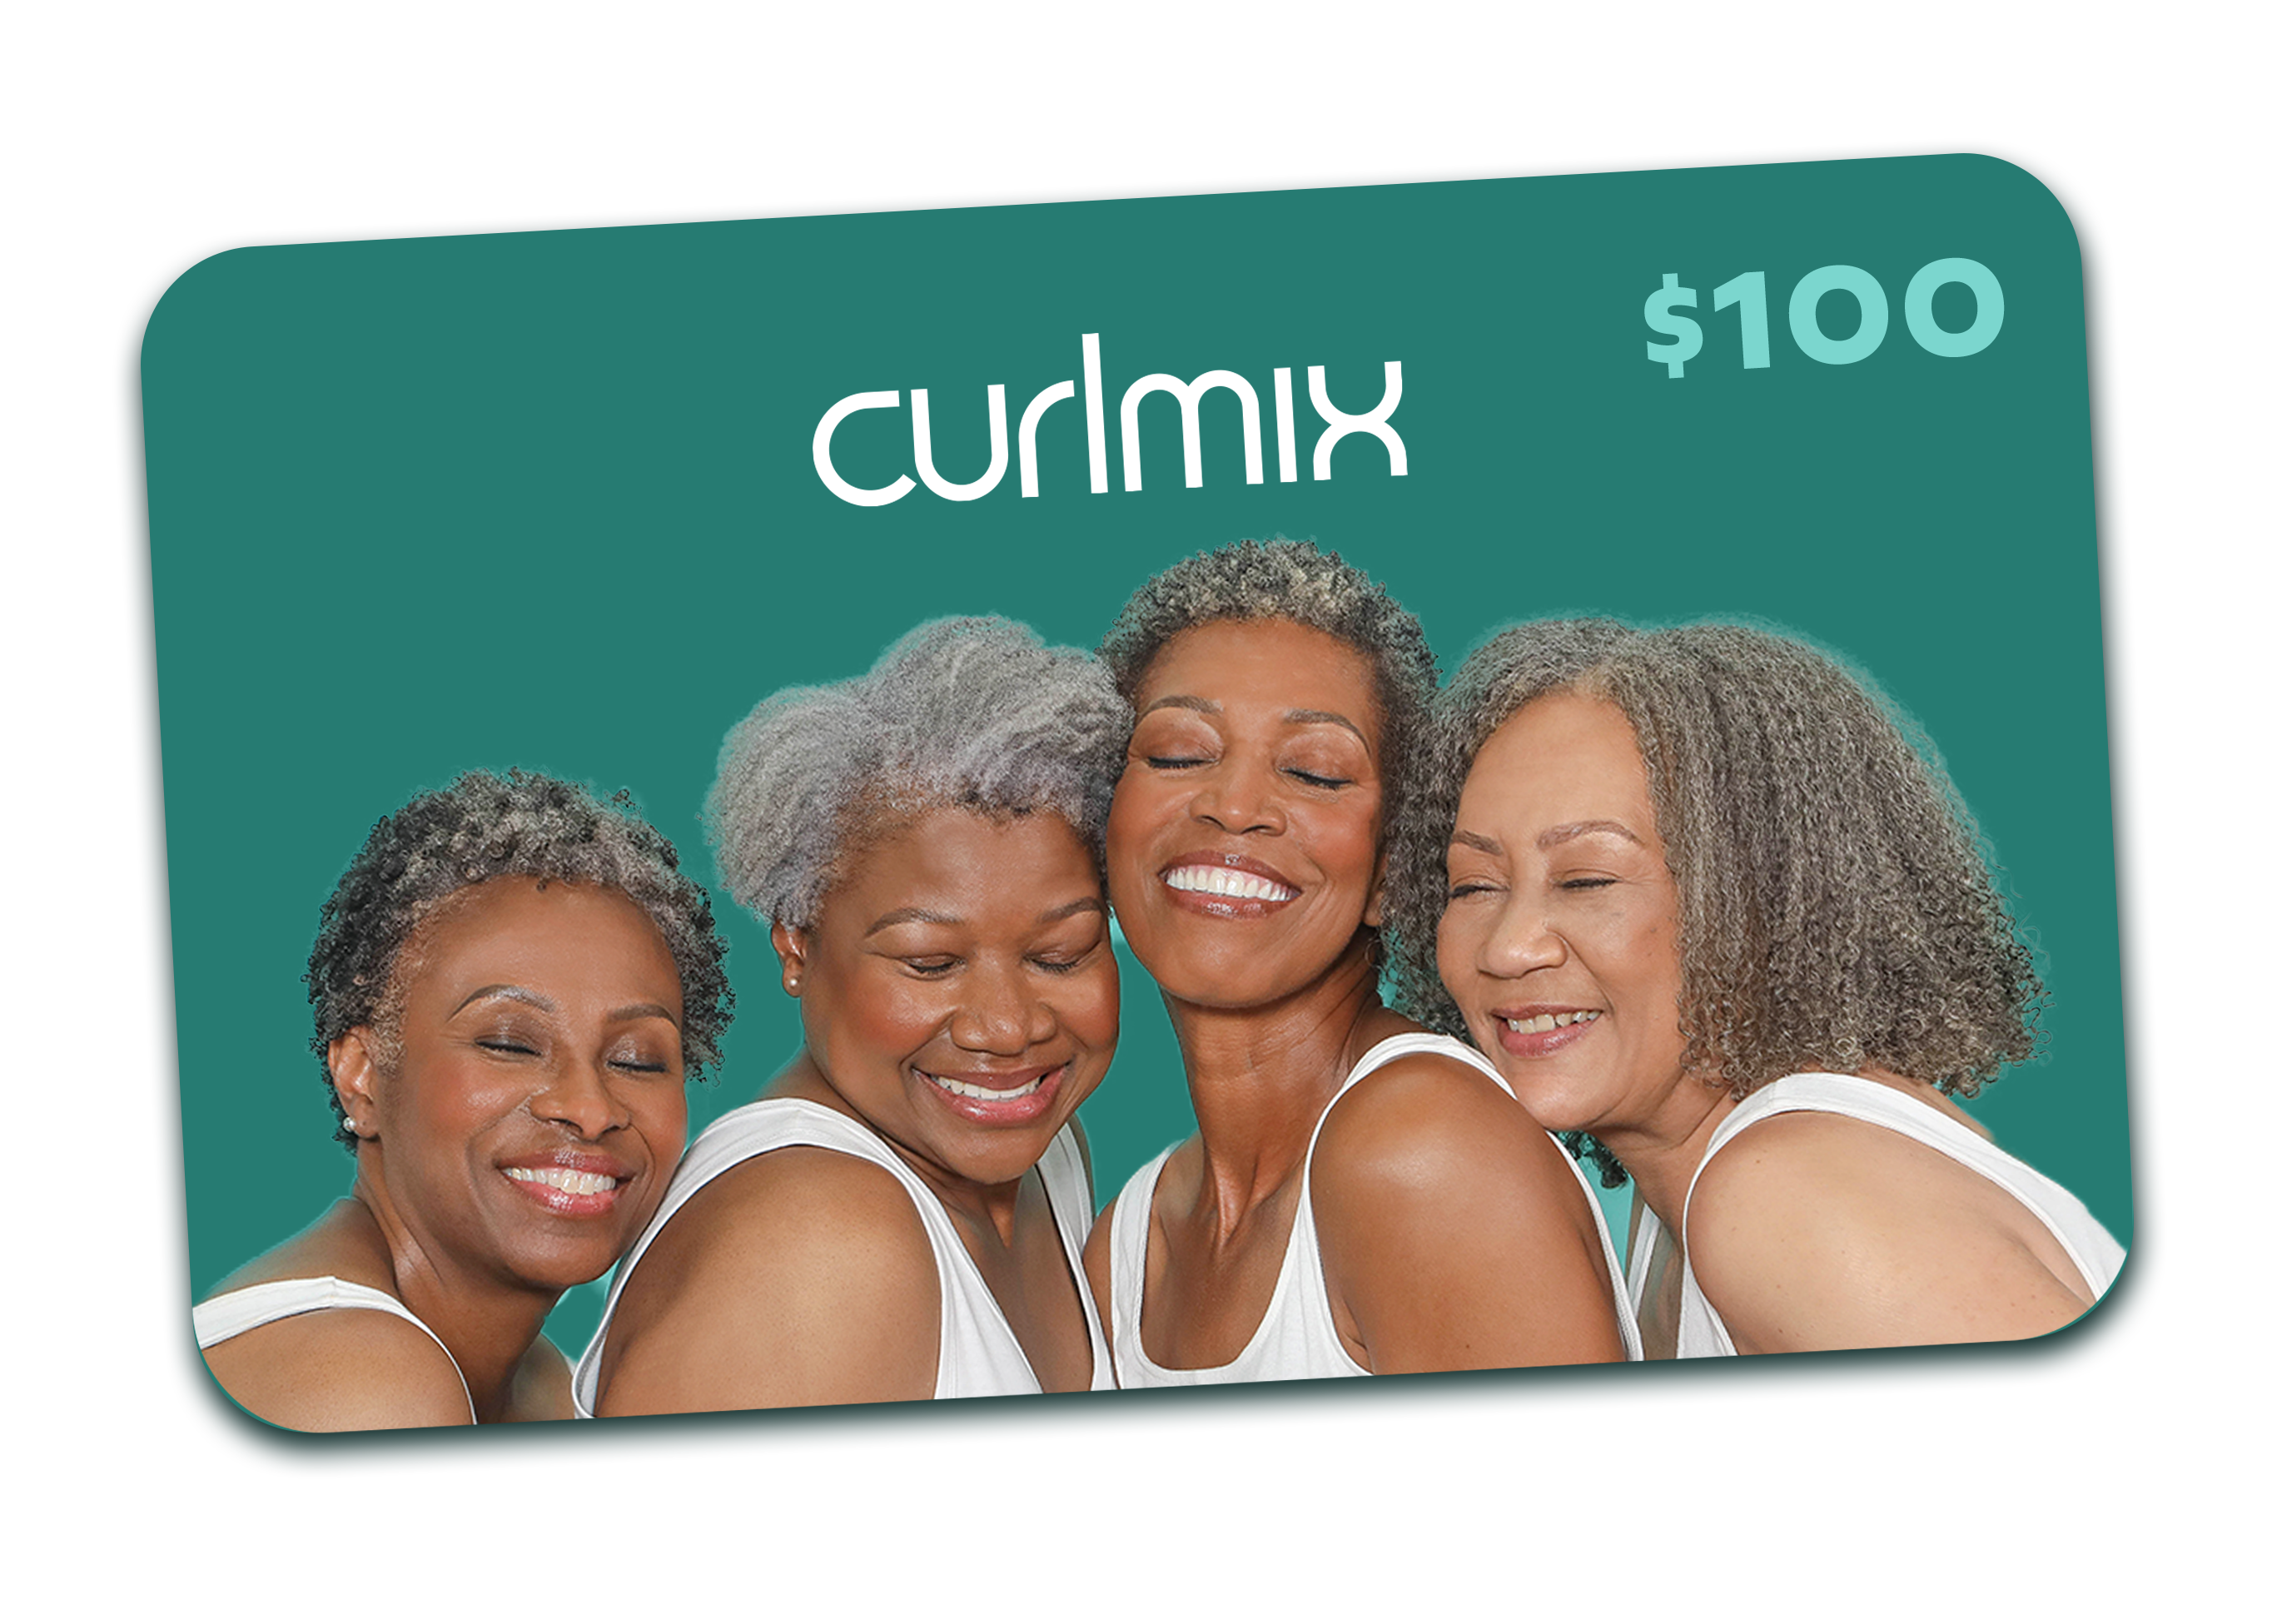 Gift card - CurlMix